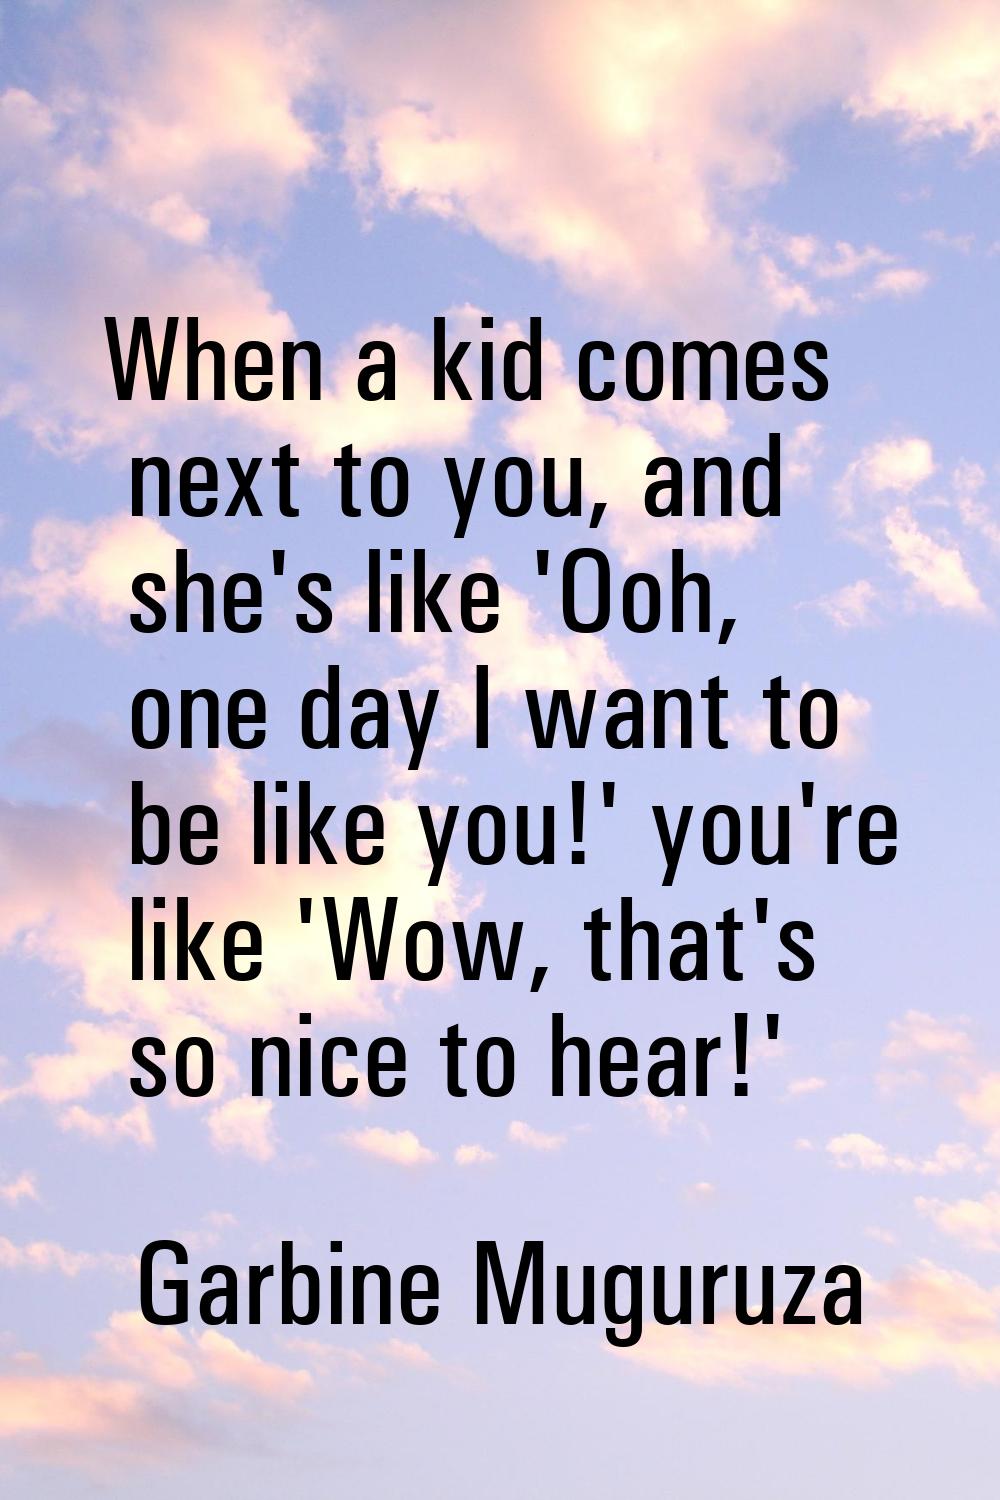 When a kid comes next to you, and she's like 'Ooh, one day I want to be like you!' you're like 'Wow